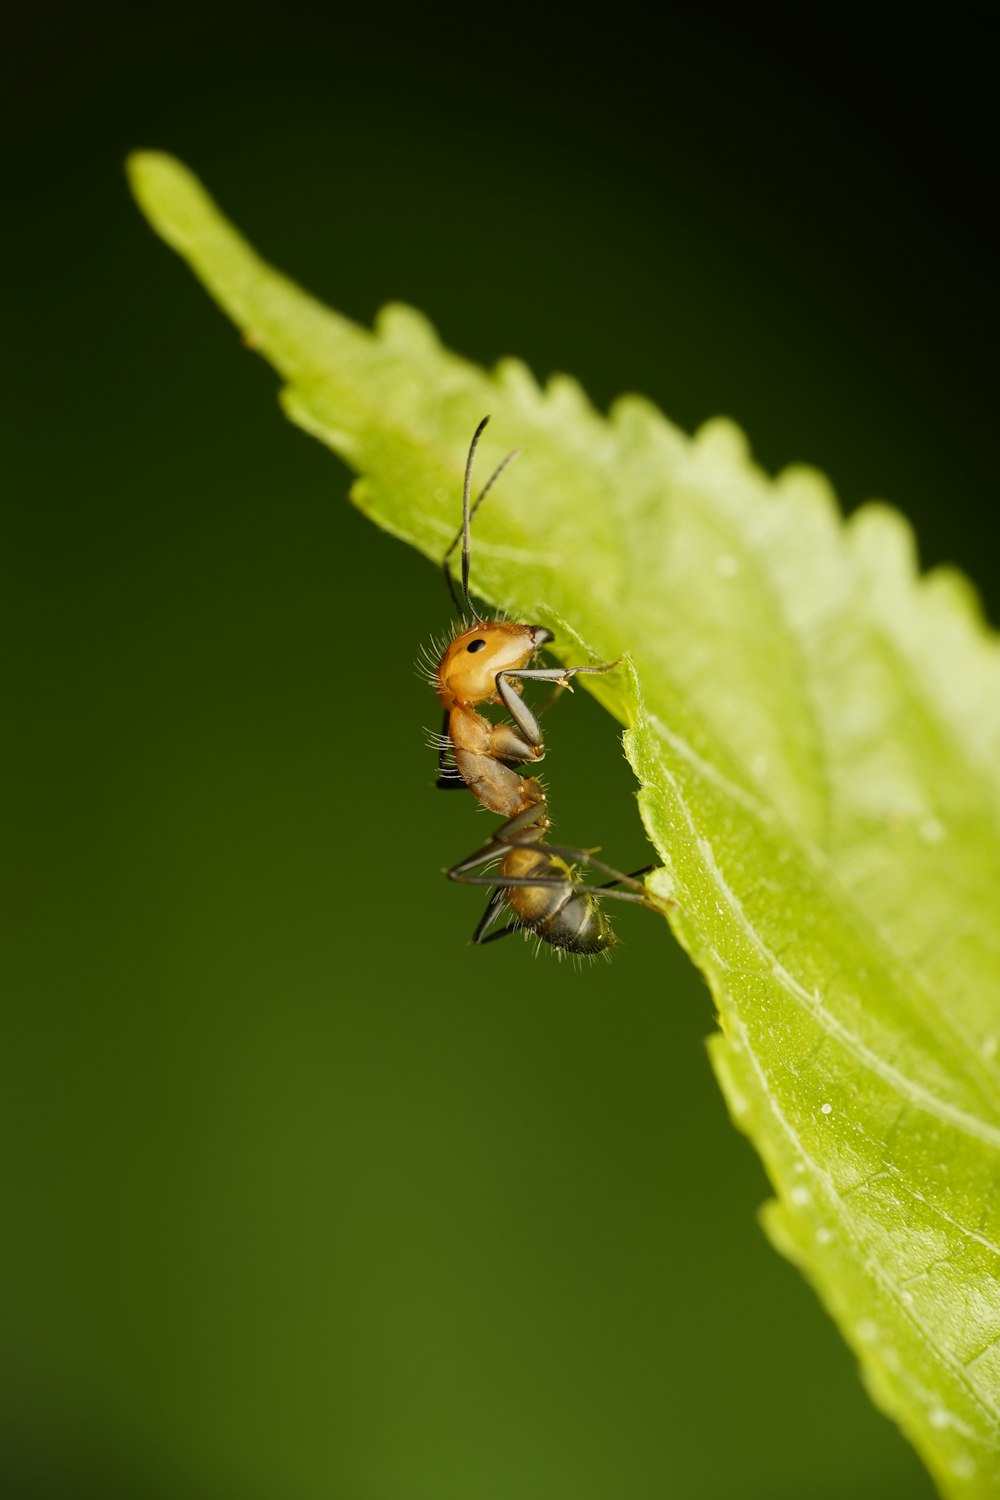 brown and black ant on green leaf in macro photography